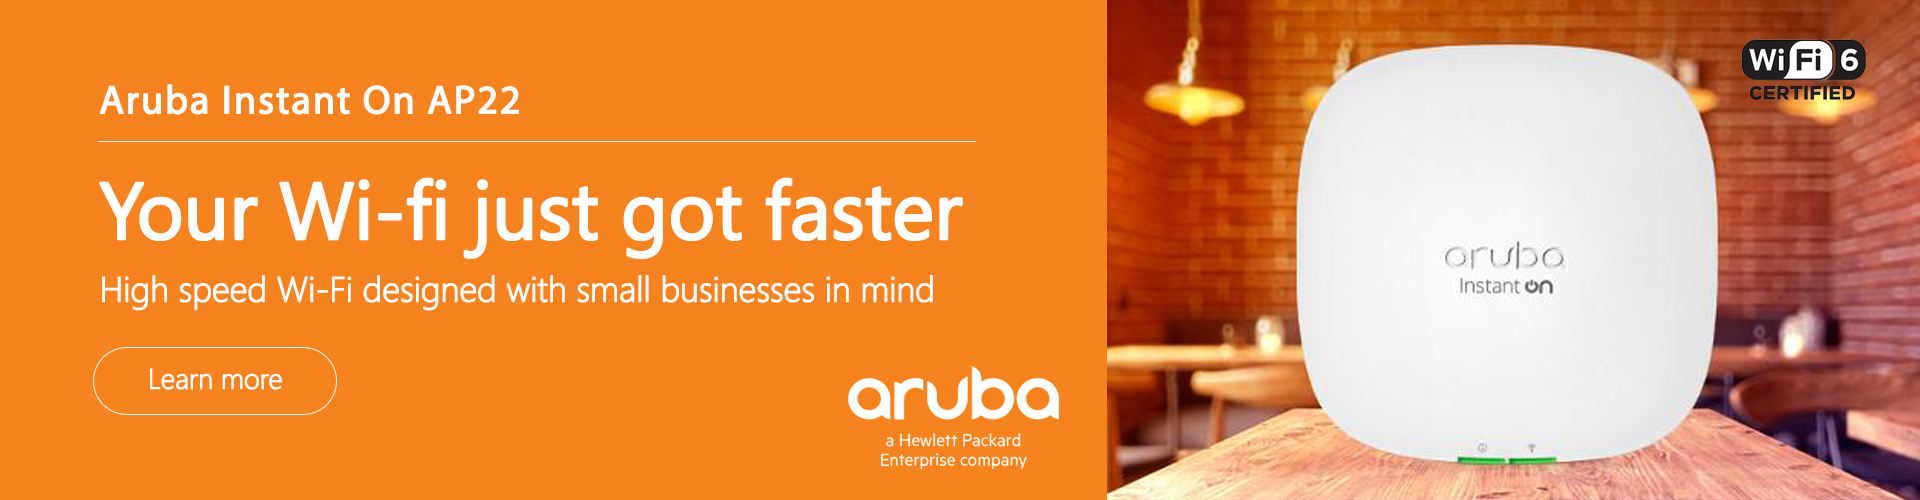 Aruba Instant On AP22 - High speed WiFi designed with small businesses in mind